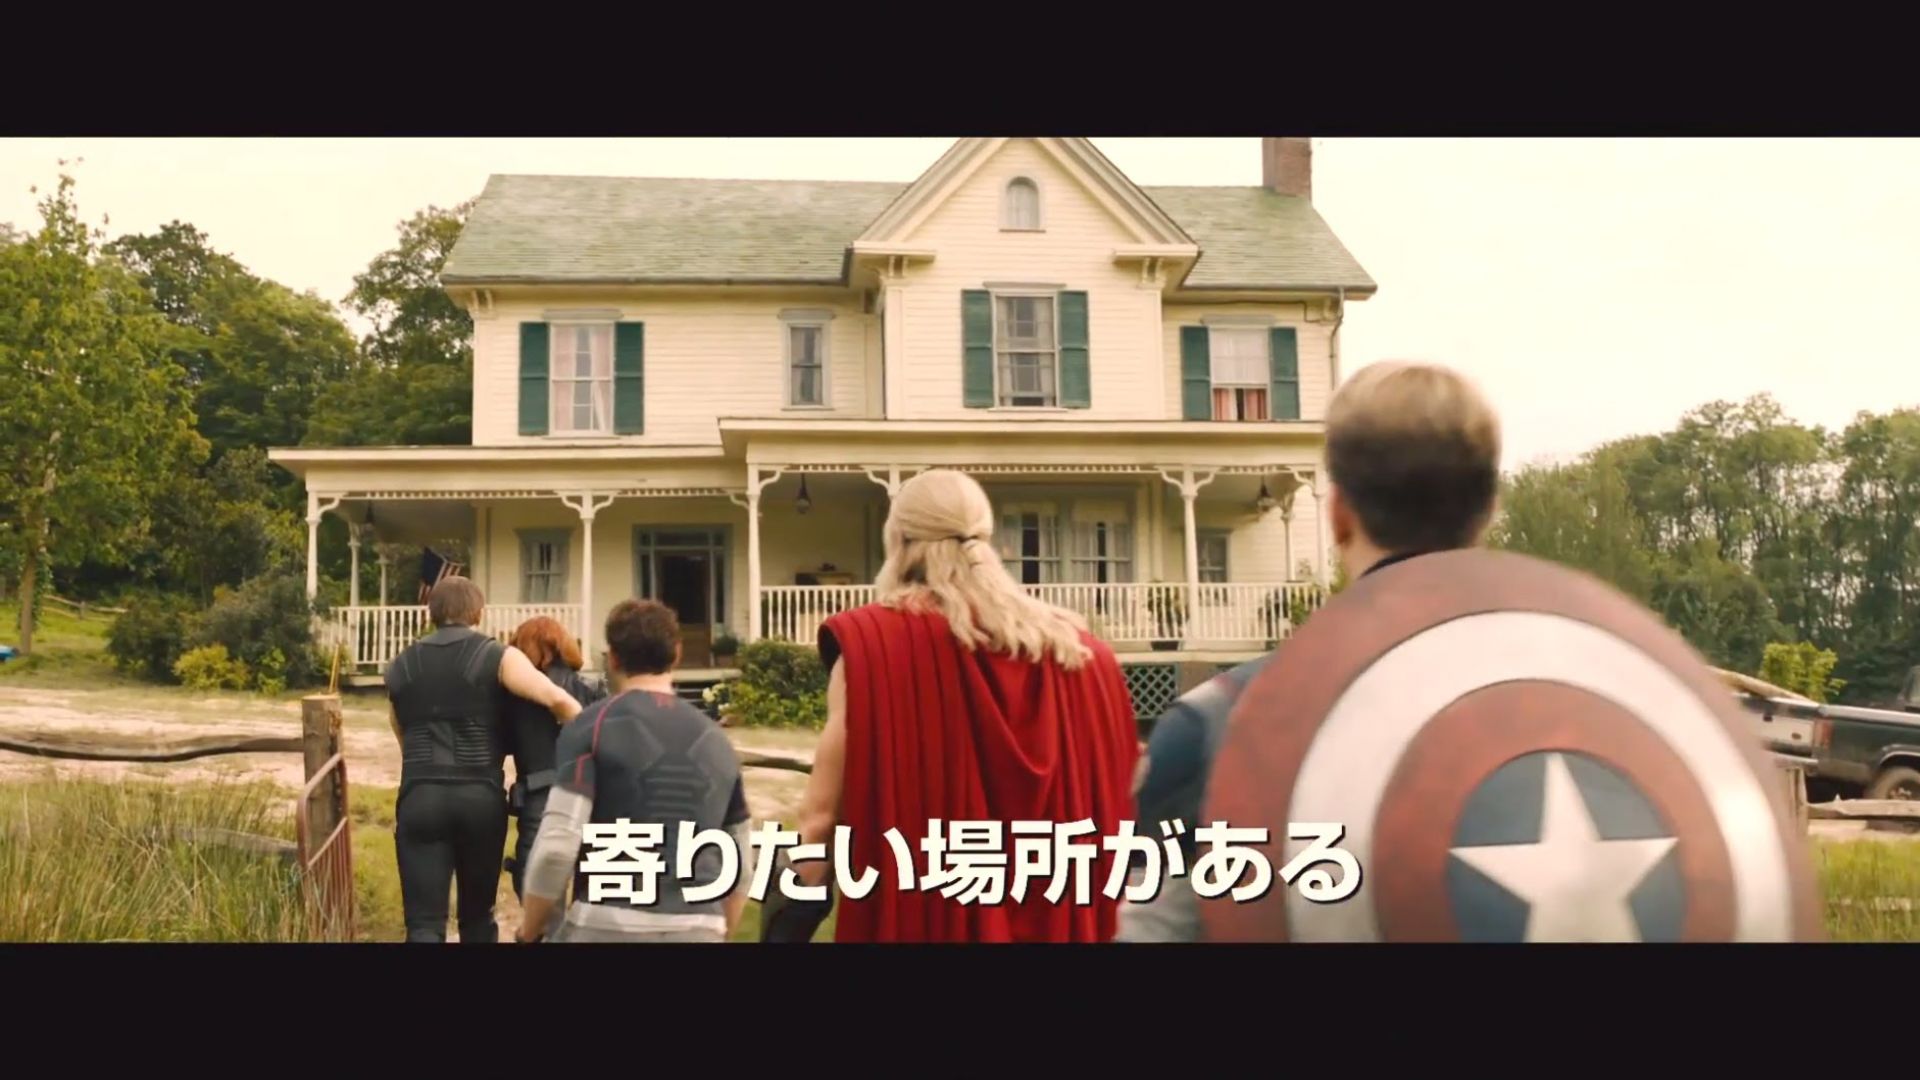 Avengers: Age Of Ultron gets emo Japanese trailer